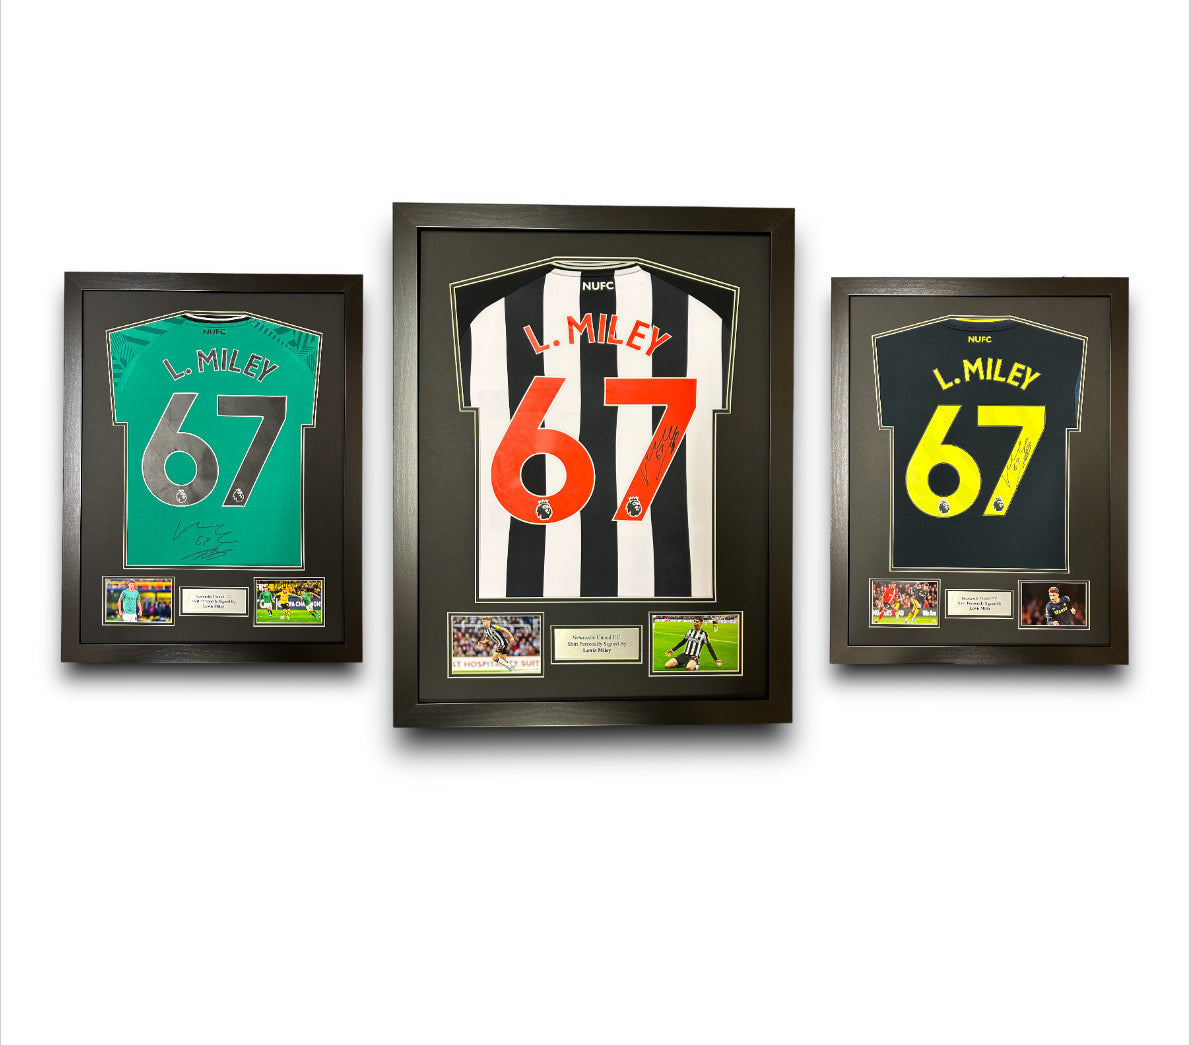 Newcastle United FC Home Shirt 2023-2024 Framed Signed By Lewis Miley